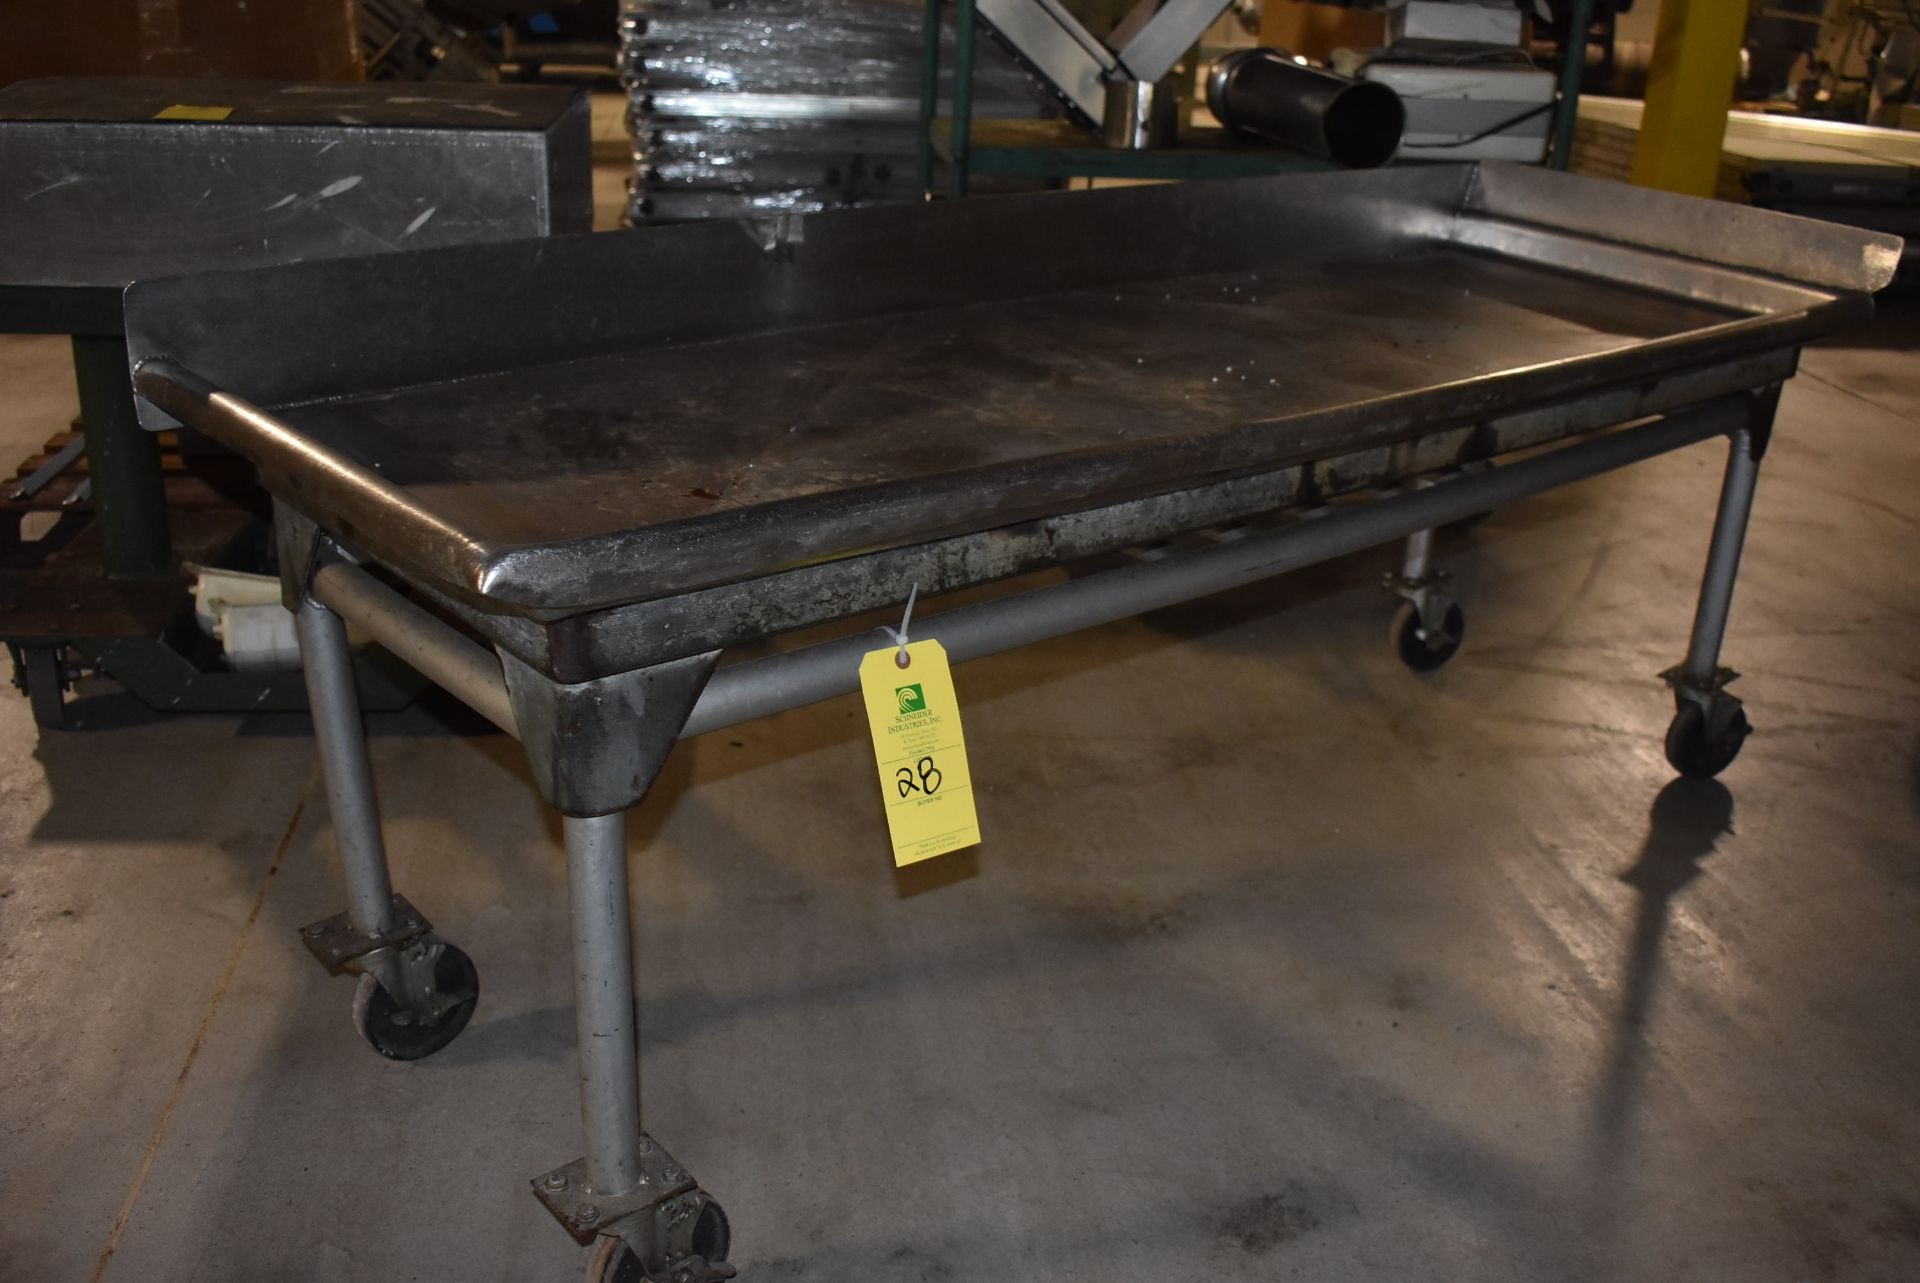 Stainless Steel Table, 6' x 2' Wide, 4-Wheel Base